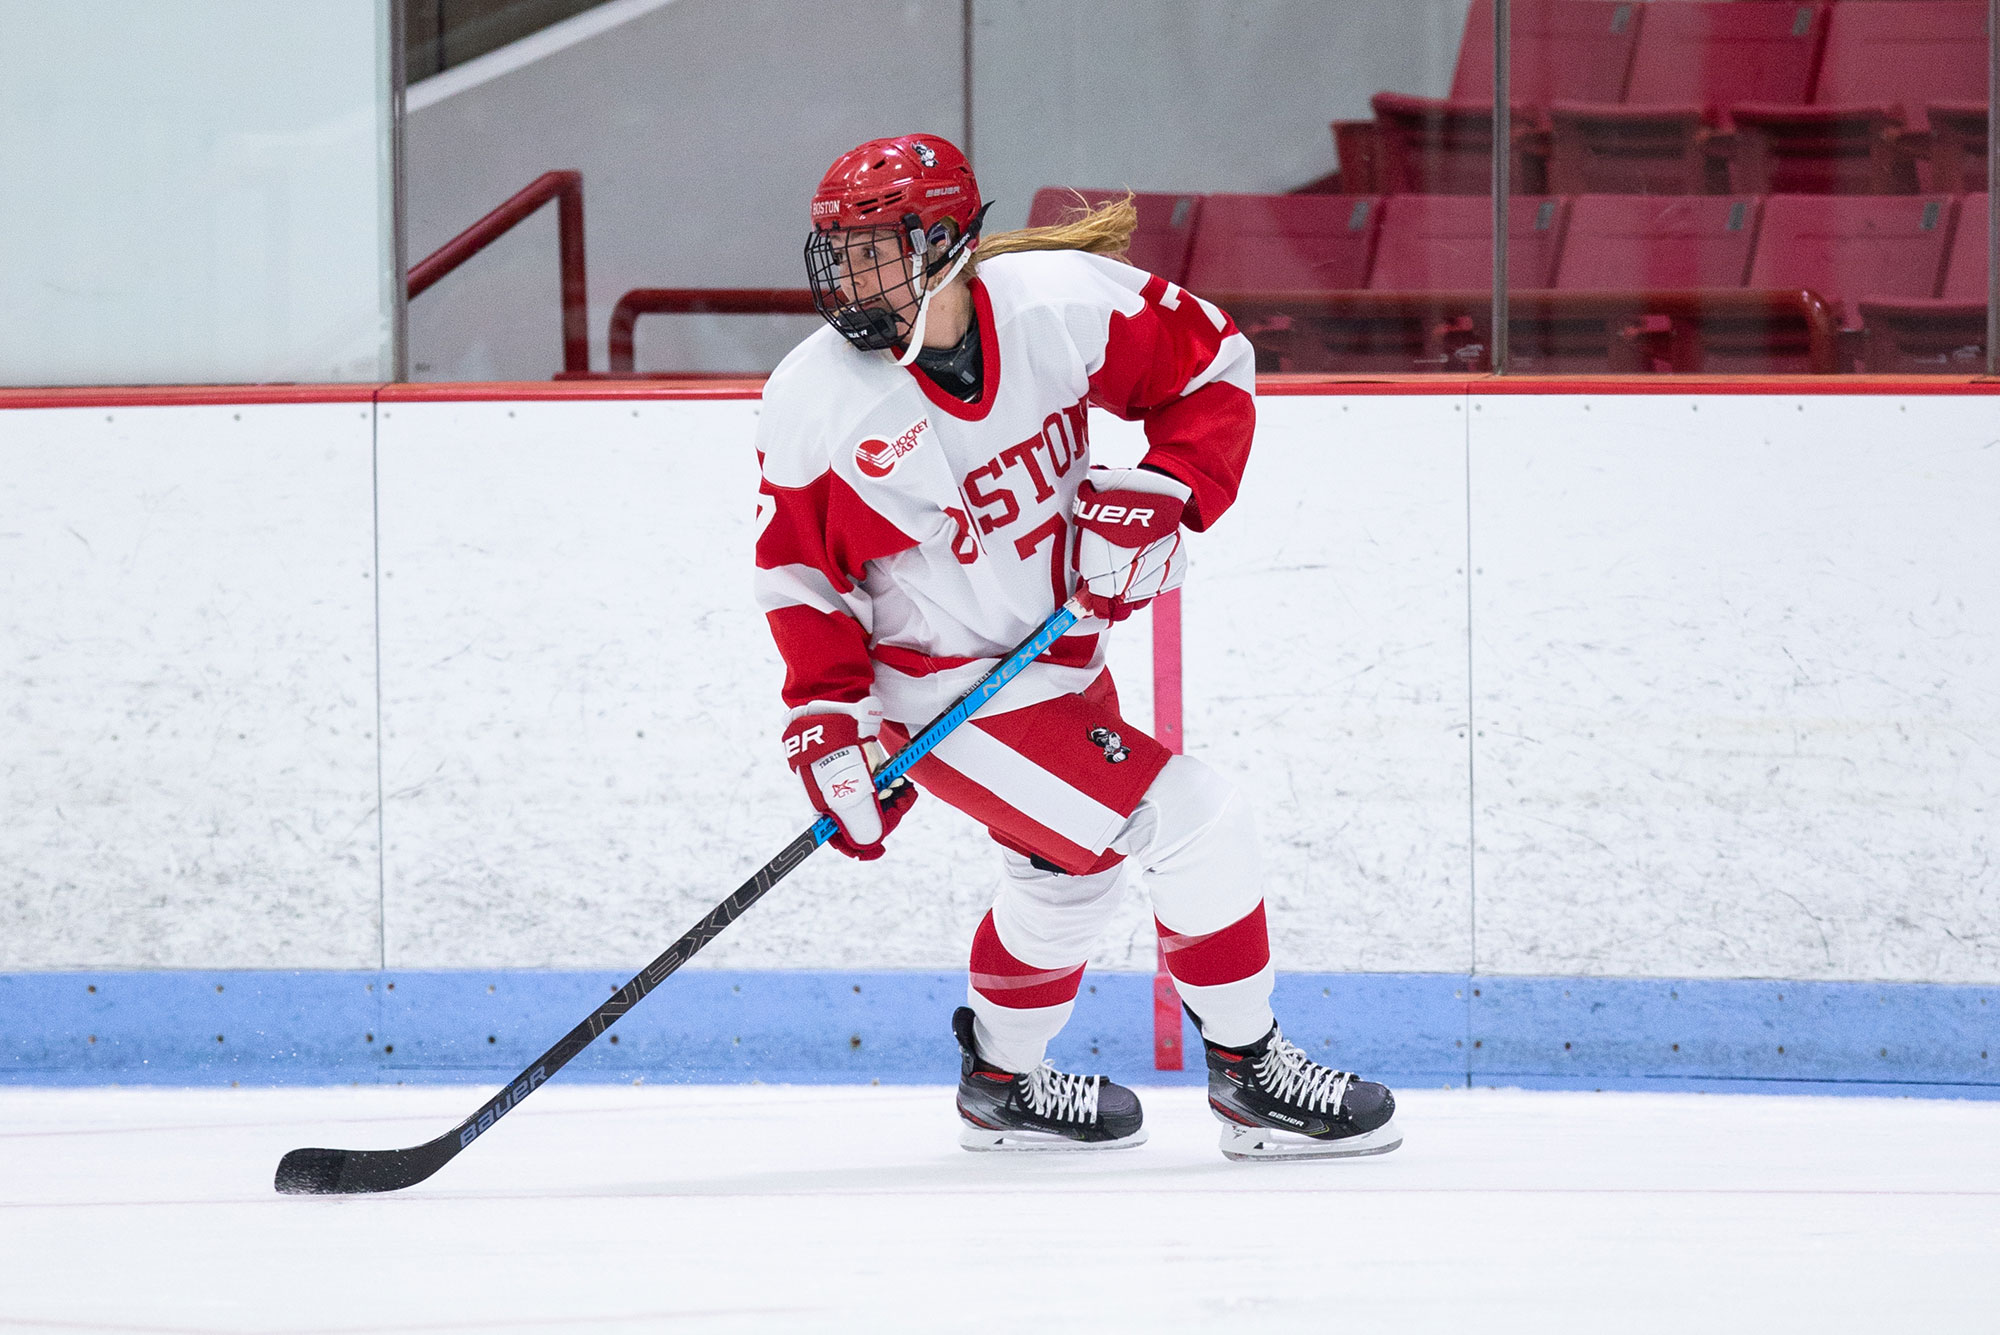 Boston University Terriers women's hockey forward Jesse Compher handles the puck during a game.